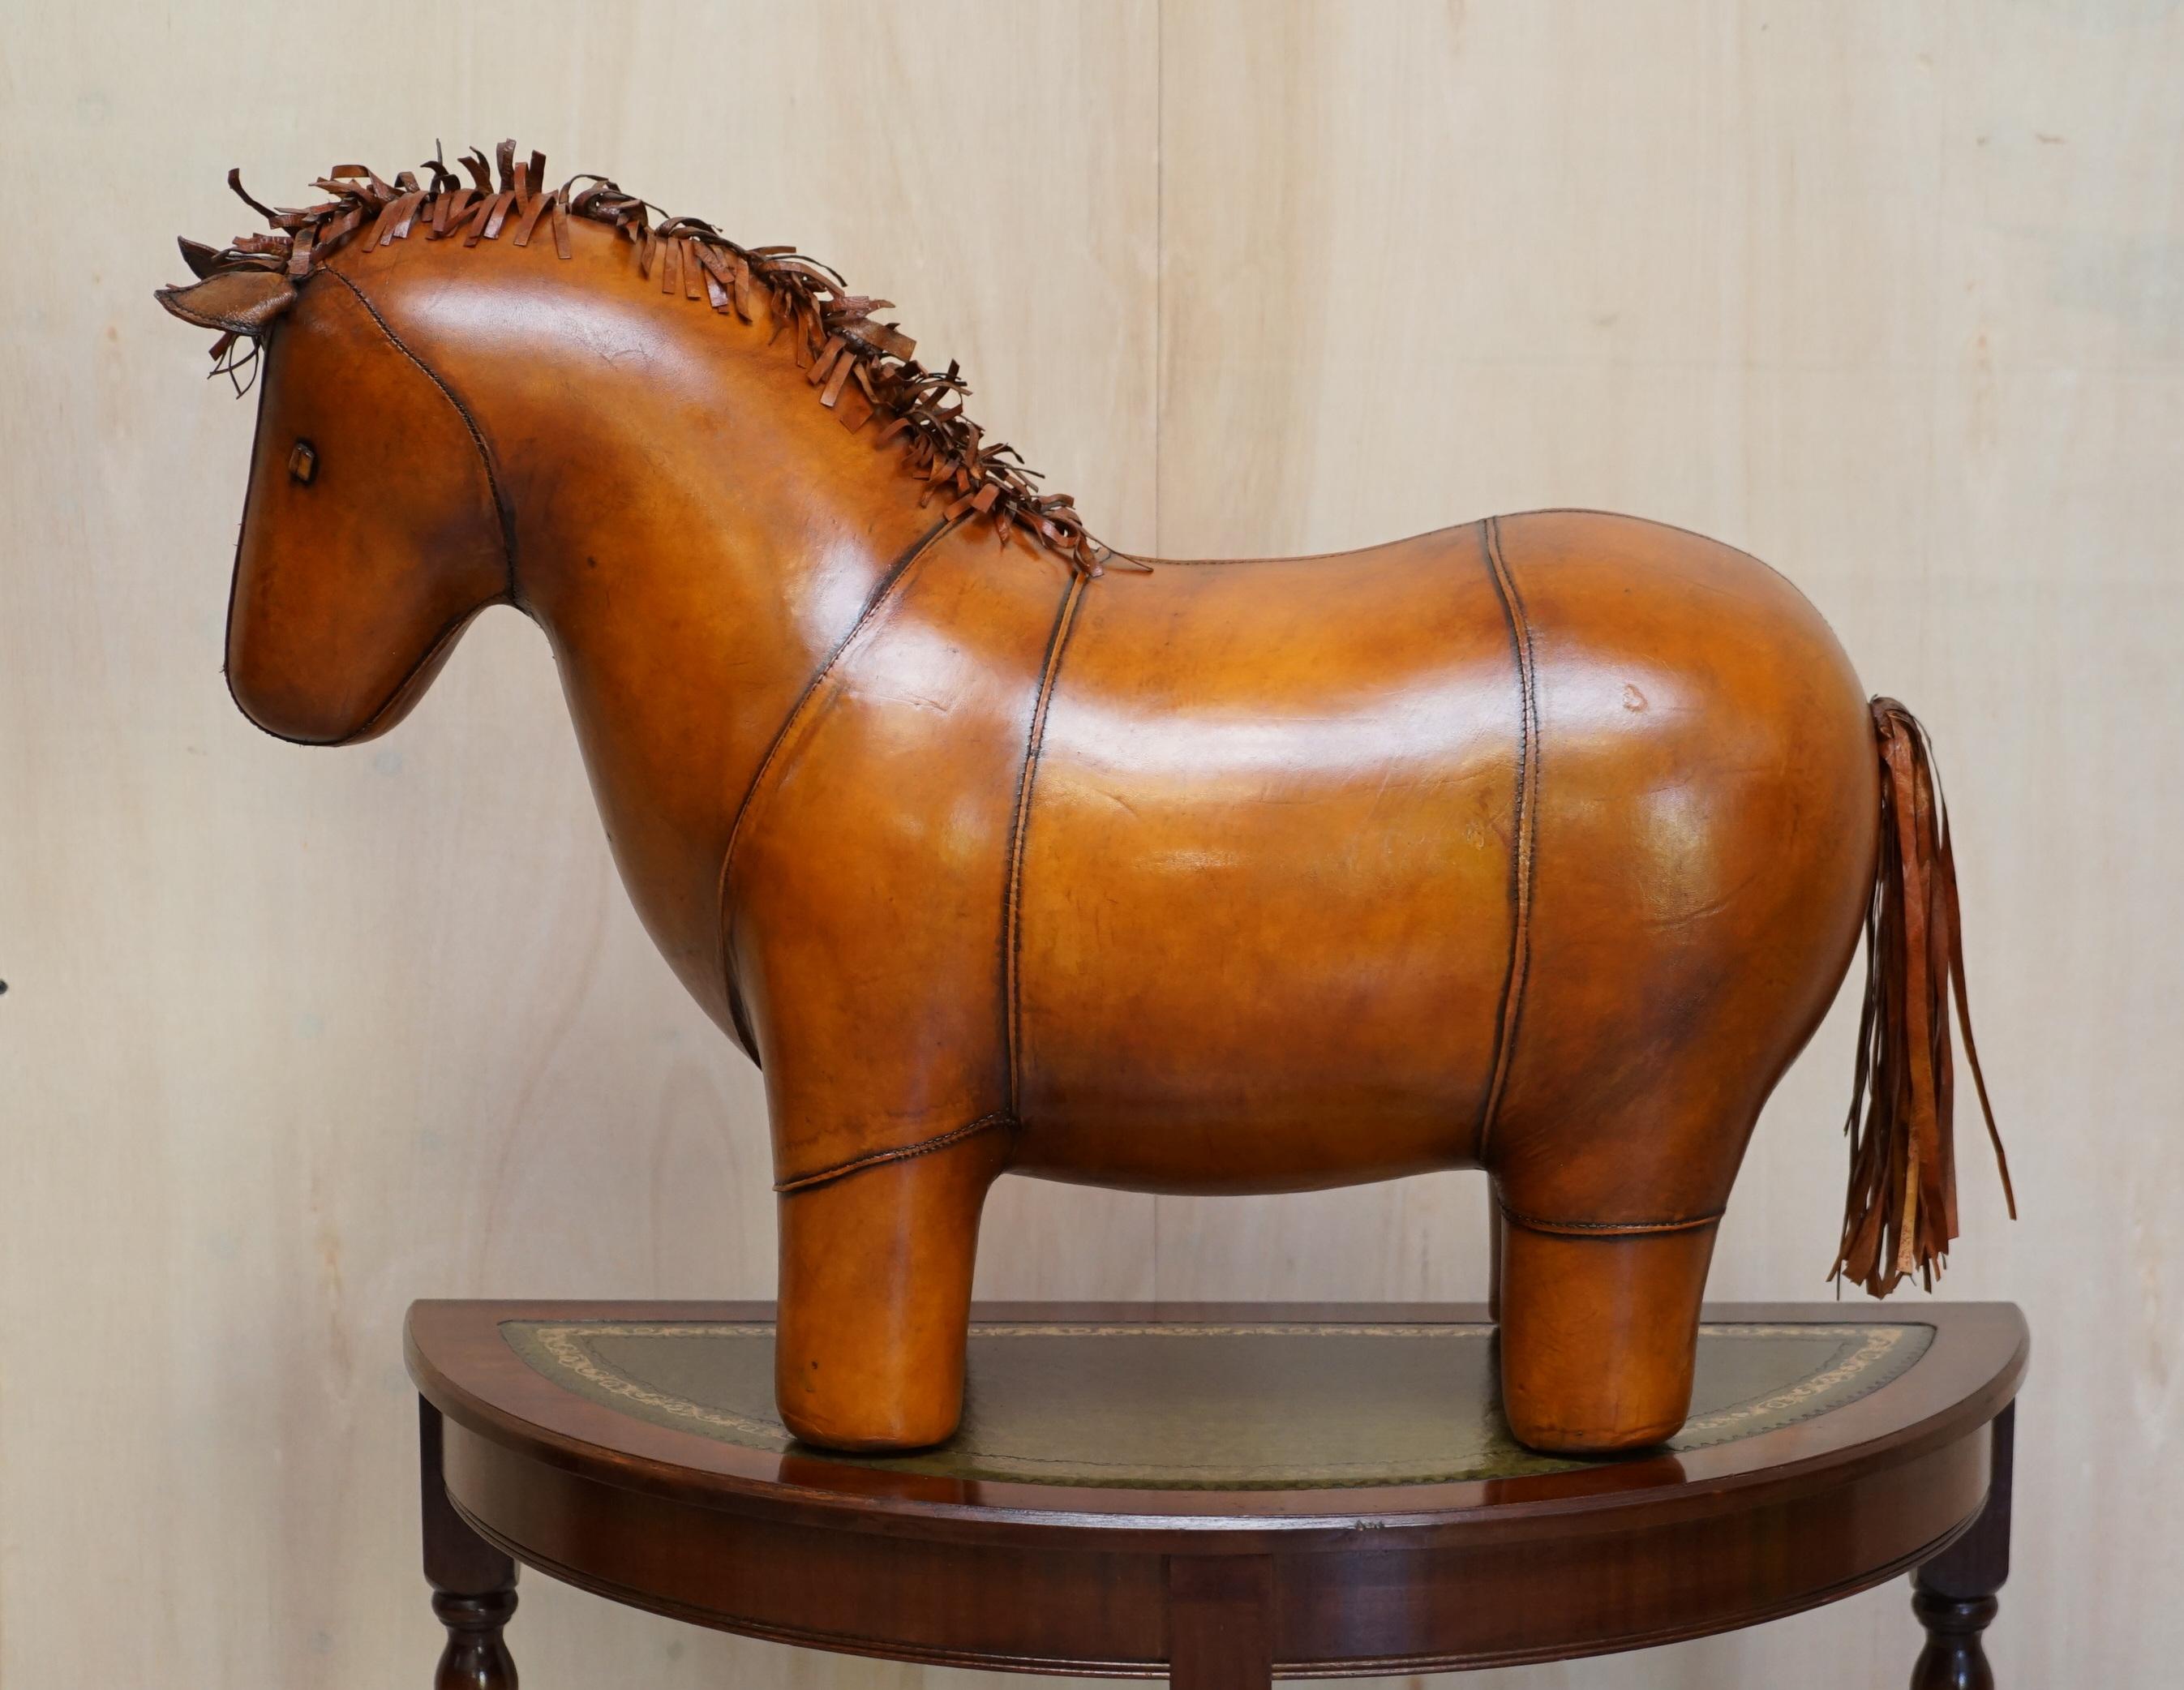 We are delighted to offer for sale this absolutely sublime Abercrombie & Fitch / Liberty's Omersa style brown leather hand dyed Donkey or Pony footstool.

These come in varying sizes there is a quite unpractical extra-large size which is around a